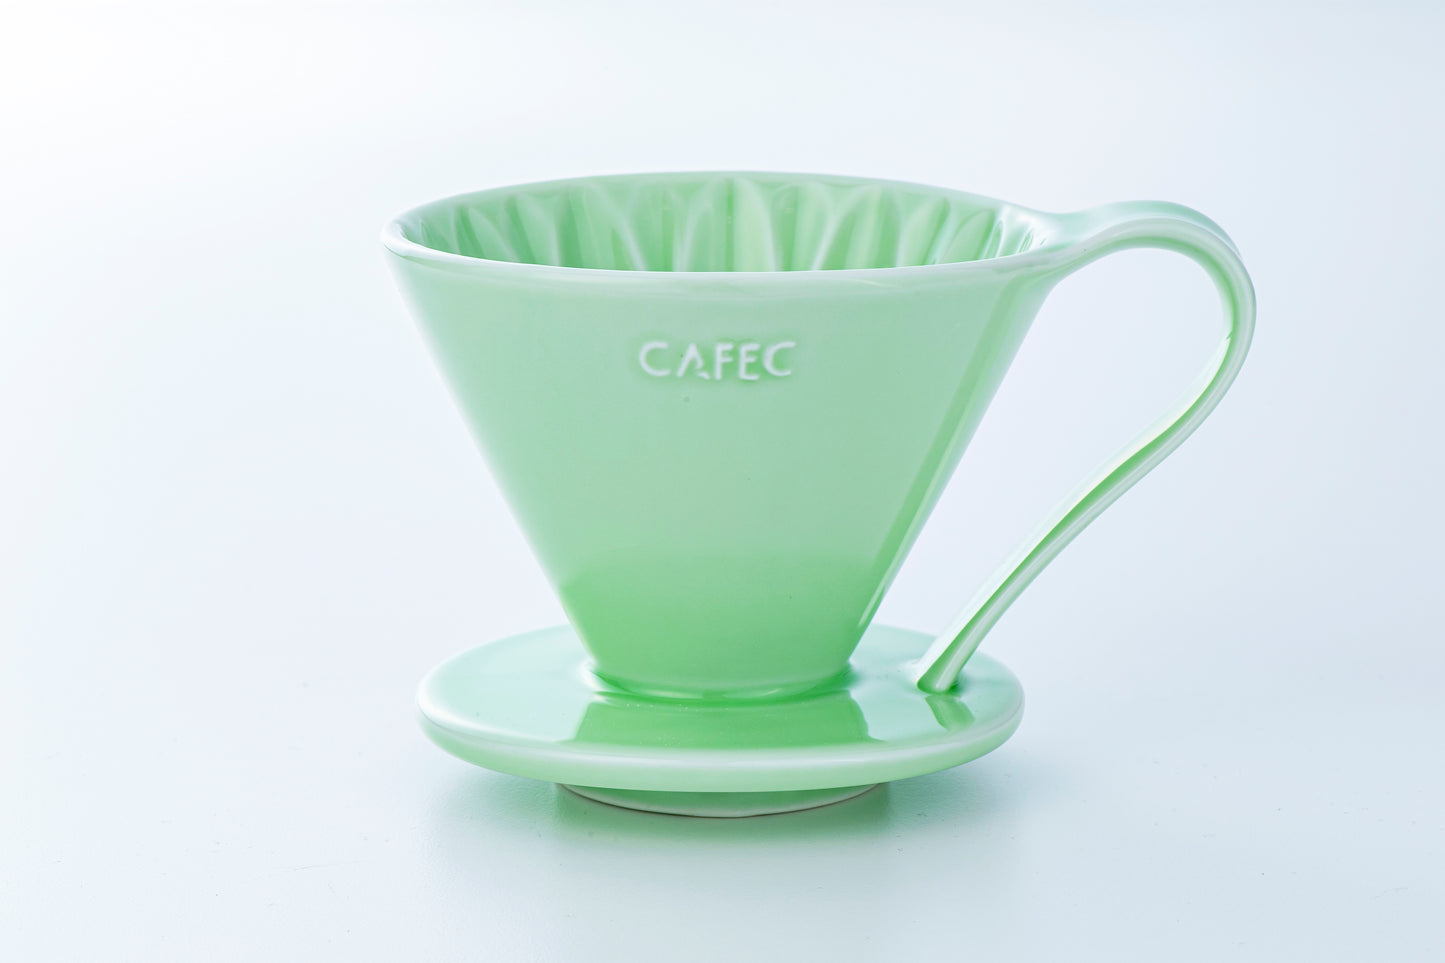 Cafec - Flower Dripper comes in Size 04